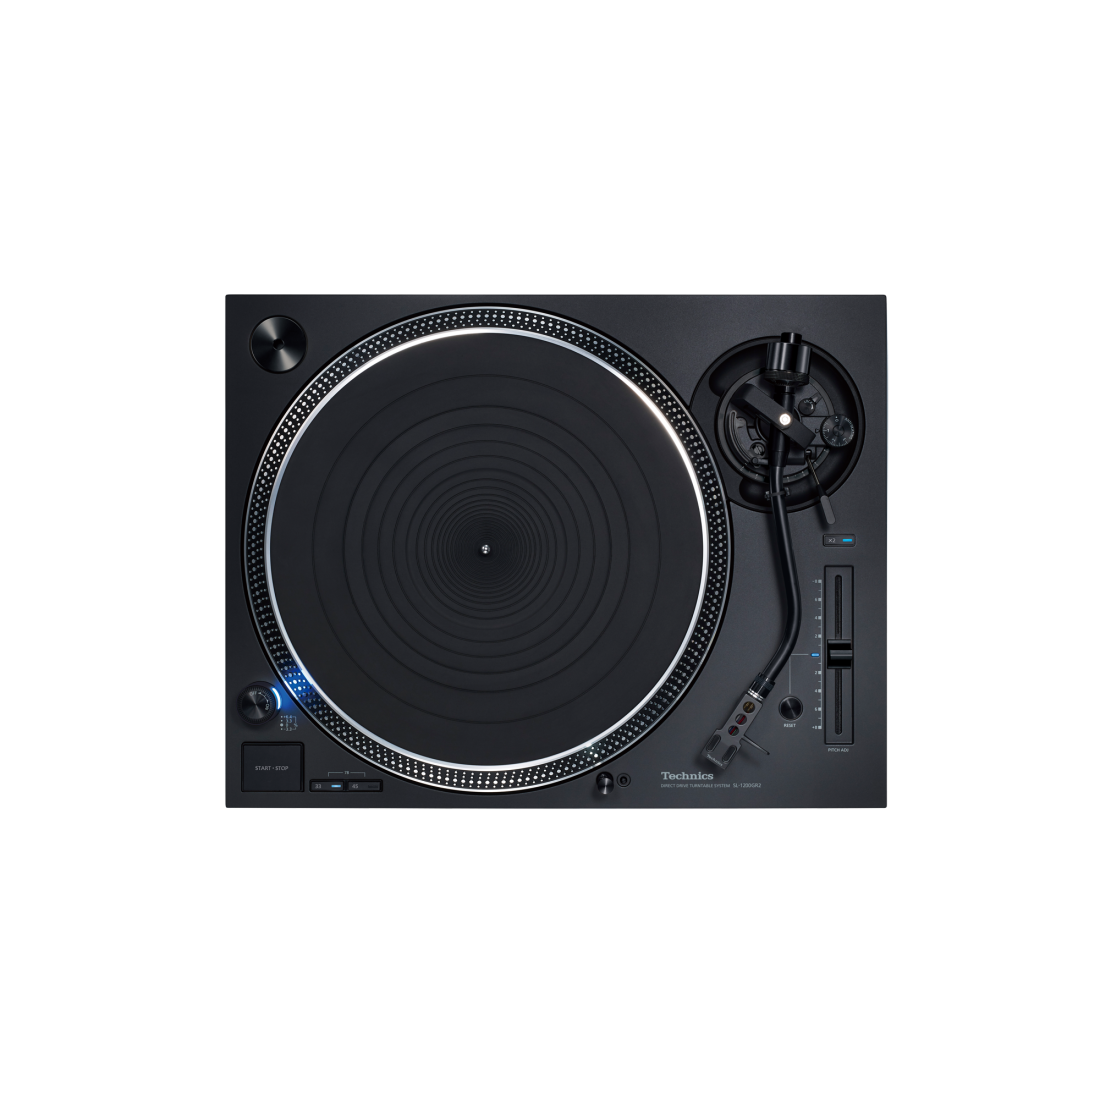 SL-1210GR2 Grand Class Direct Drive Turntable System II - Black